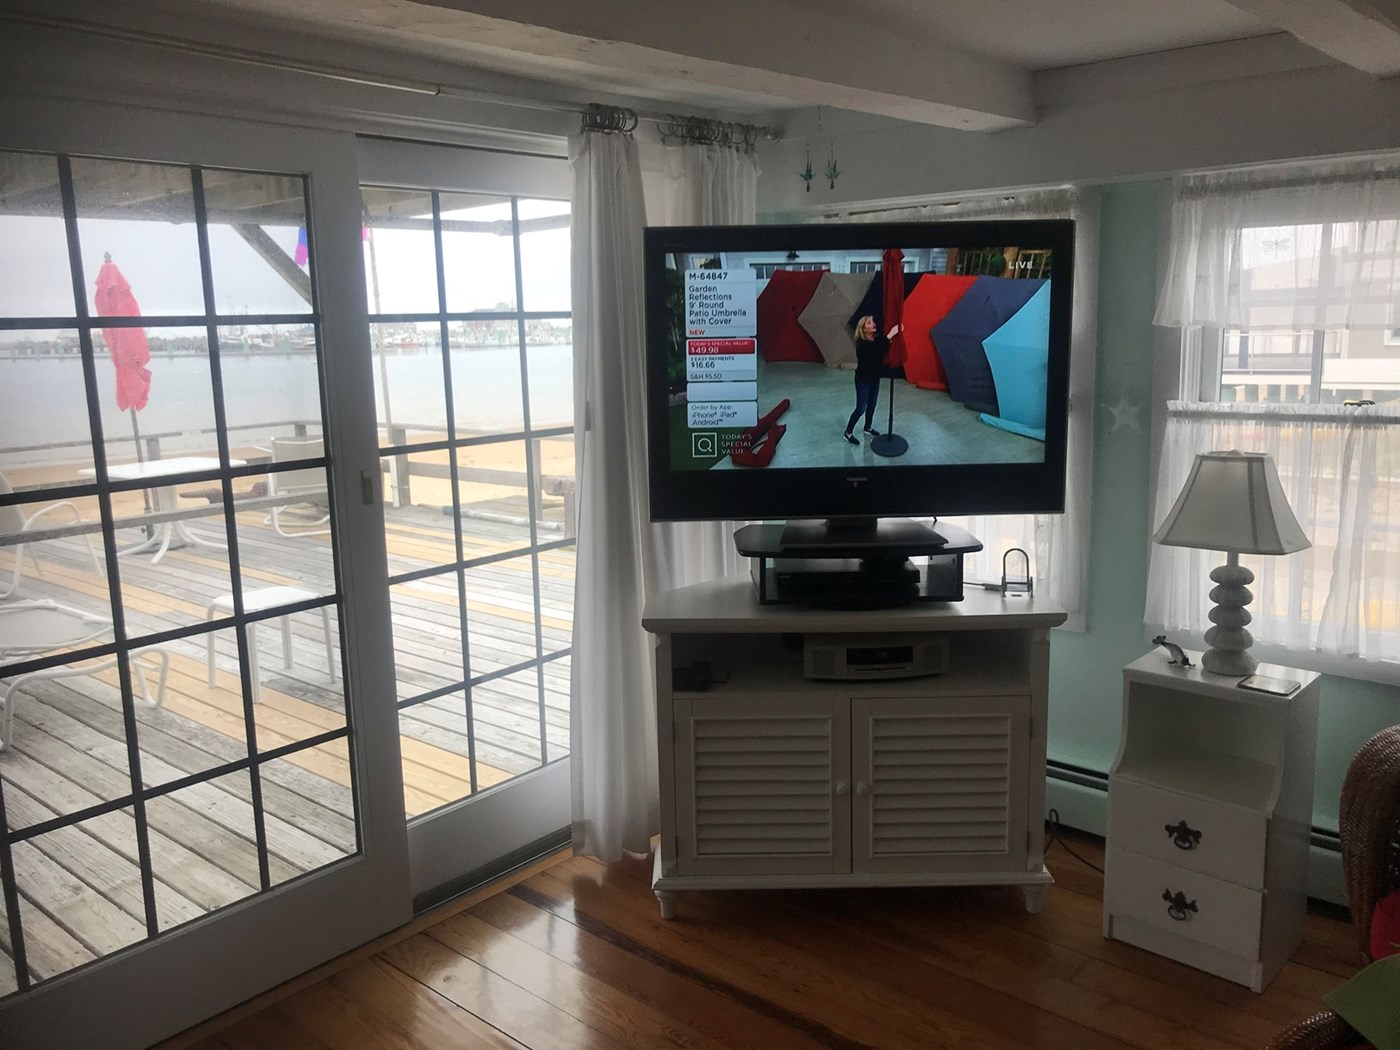 Provincetown Vacation Rental condo in Cape Cod MA, Unit is 